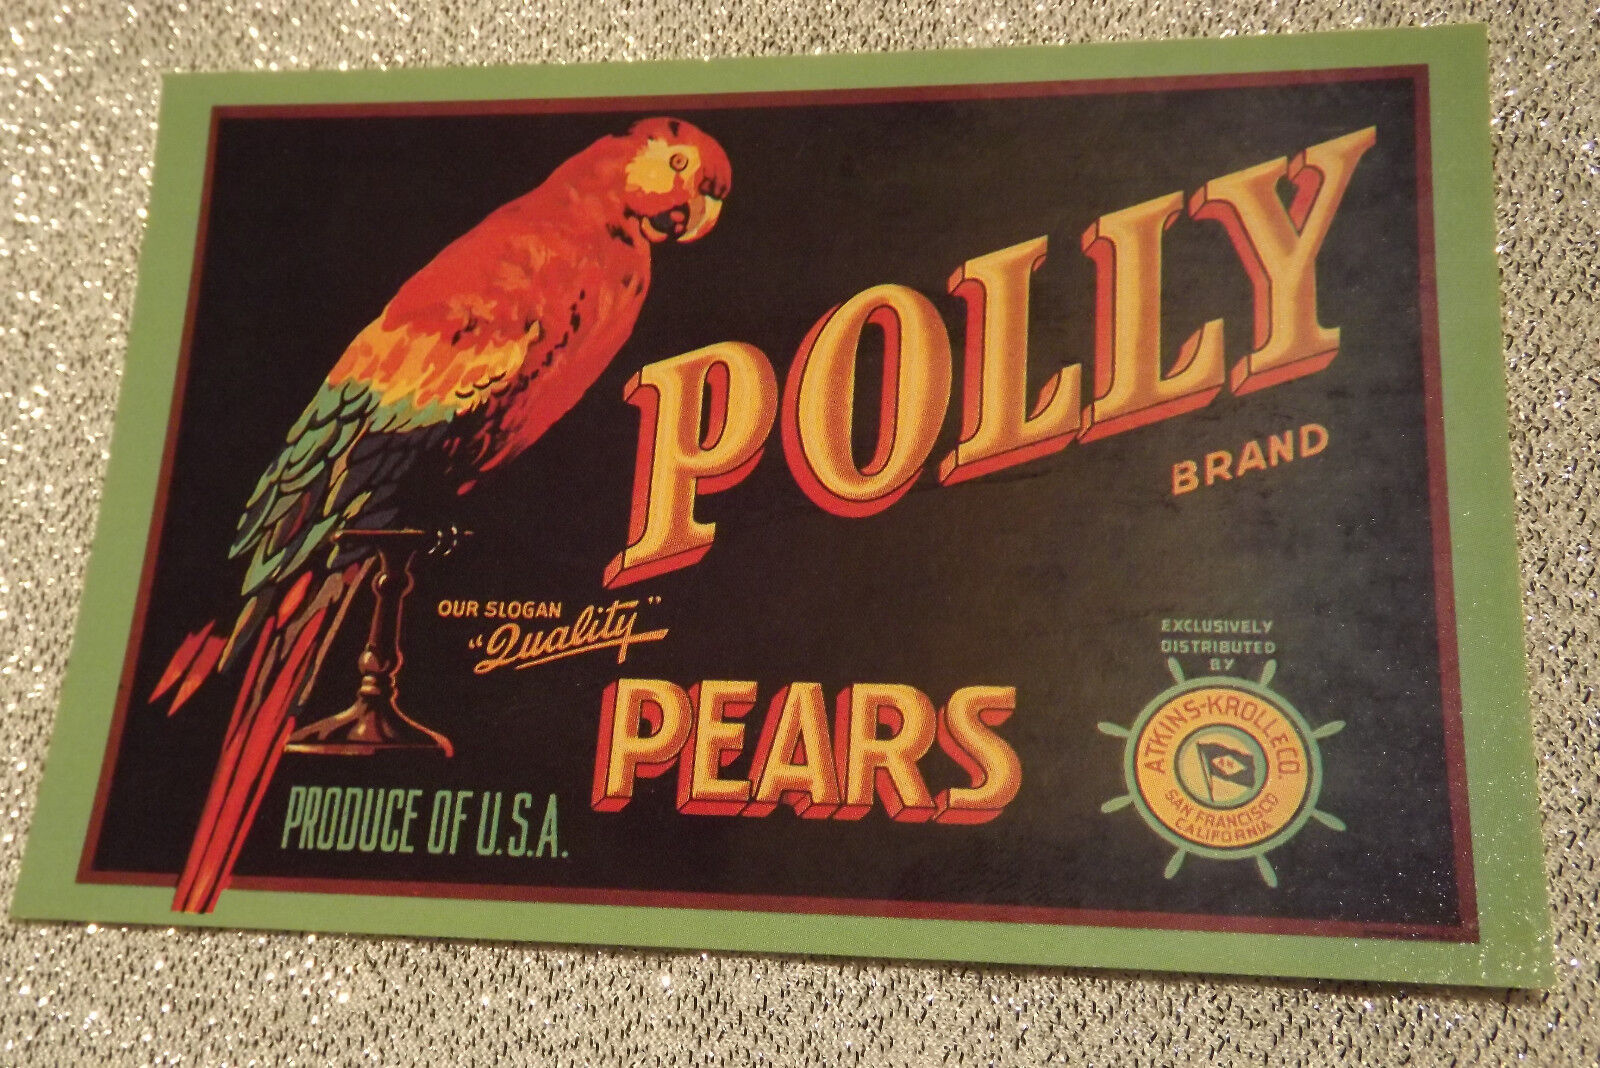 Polly Brand Pears Vintage Fruit Crate Label postcard ~ New